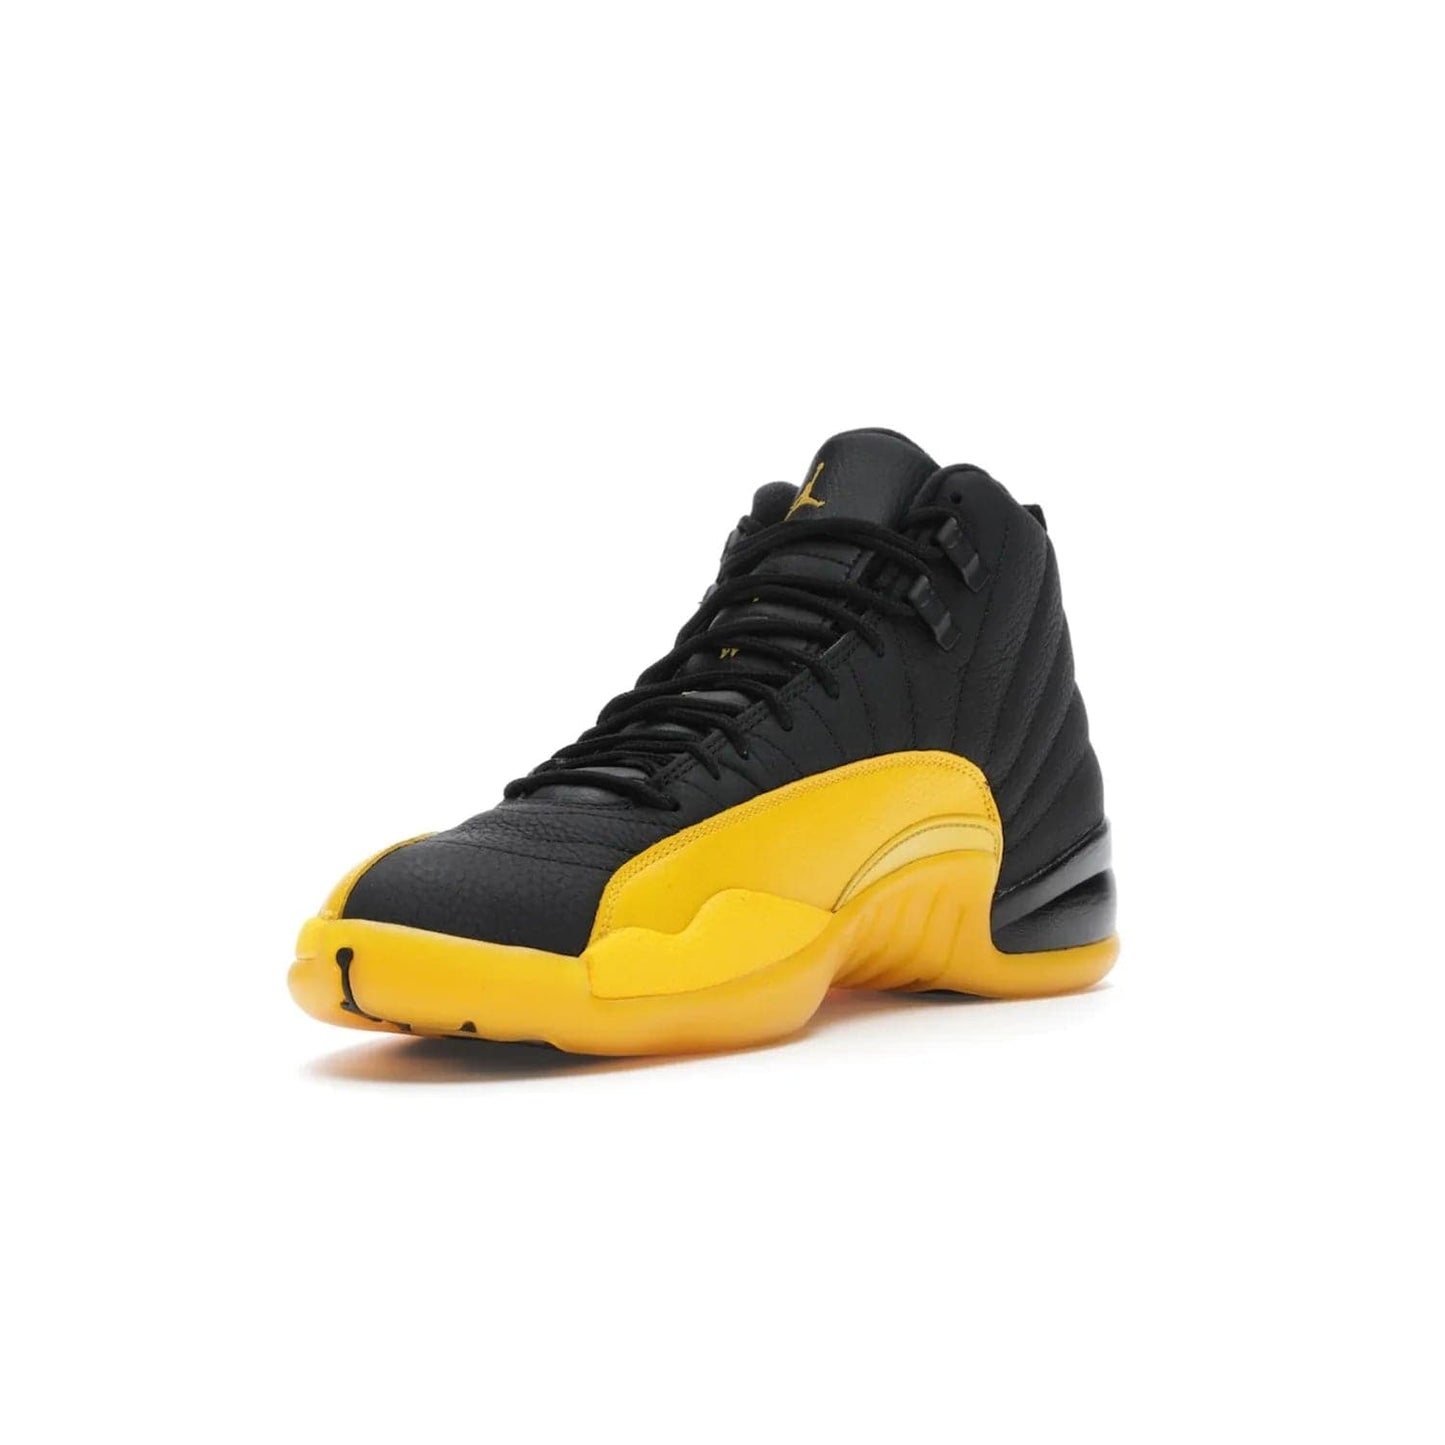 Jordan 12 Retro Black University Gold - Image 14 - Only at www.BallersClubKickz.com - This Jordan 12 Retro features a black tumbled leather upper and University Gold accents for a modern twist. Boasting Jordan "Two Three" branding and a yellow sole, these shoes will elevate your wardrobe. Fresh, sleek, and one of a kind - the Jordan 12 University Gold is your summer sneaker.